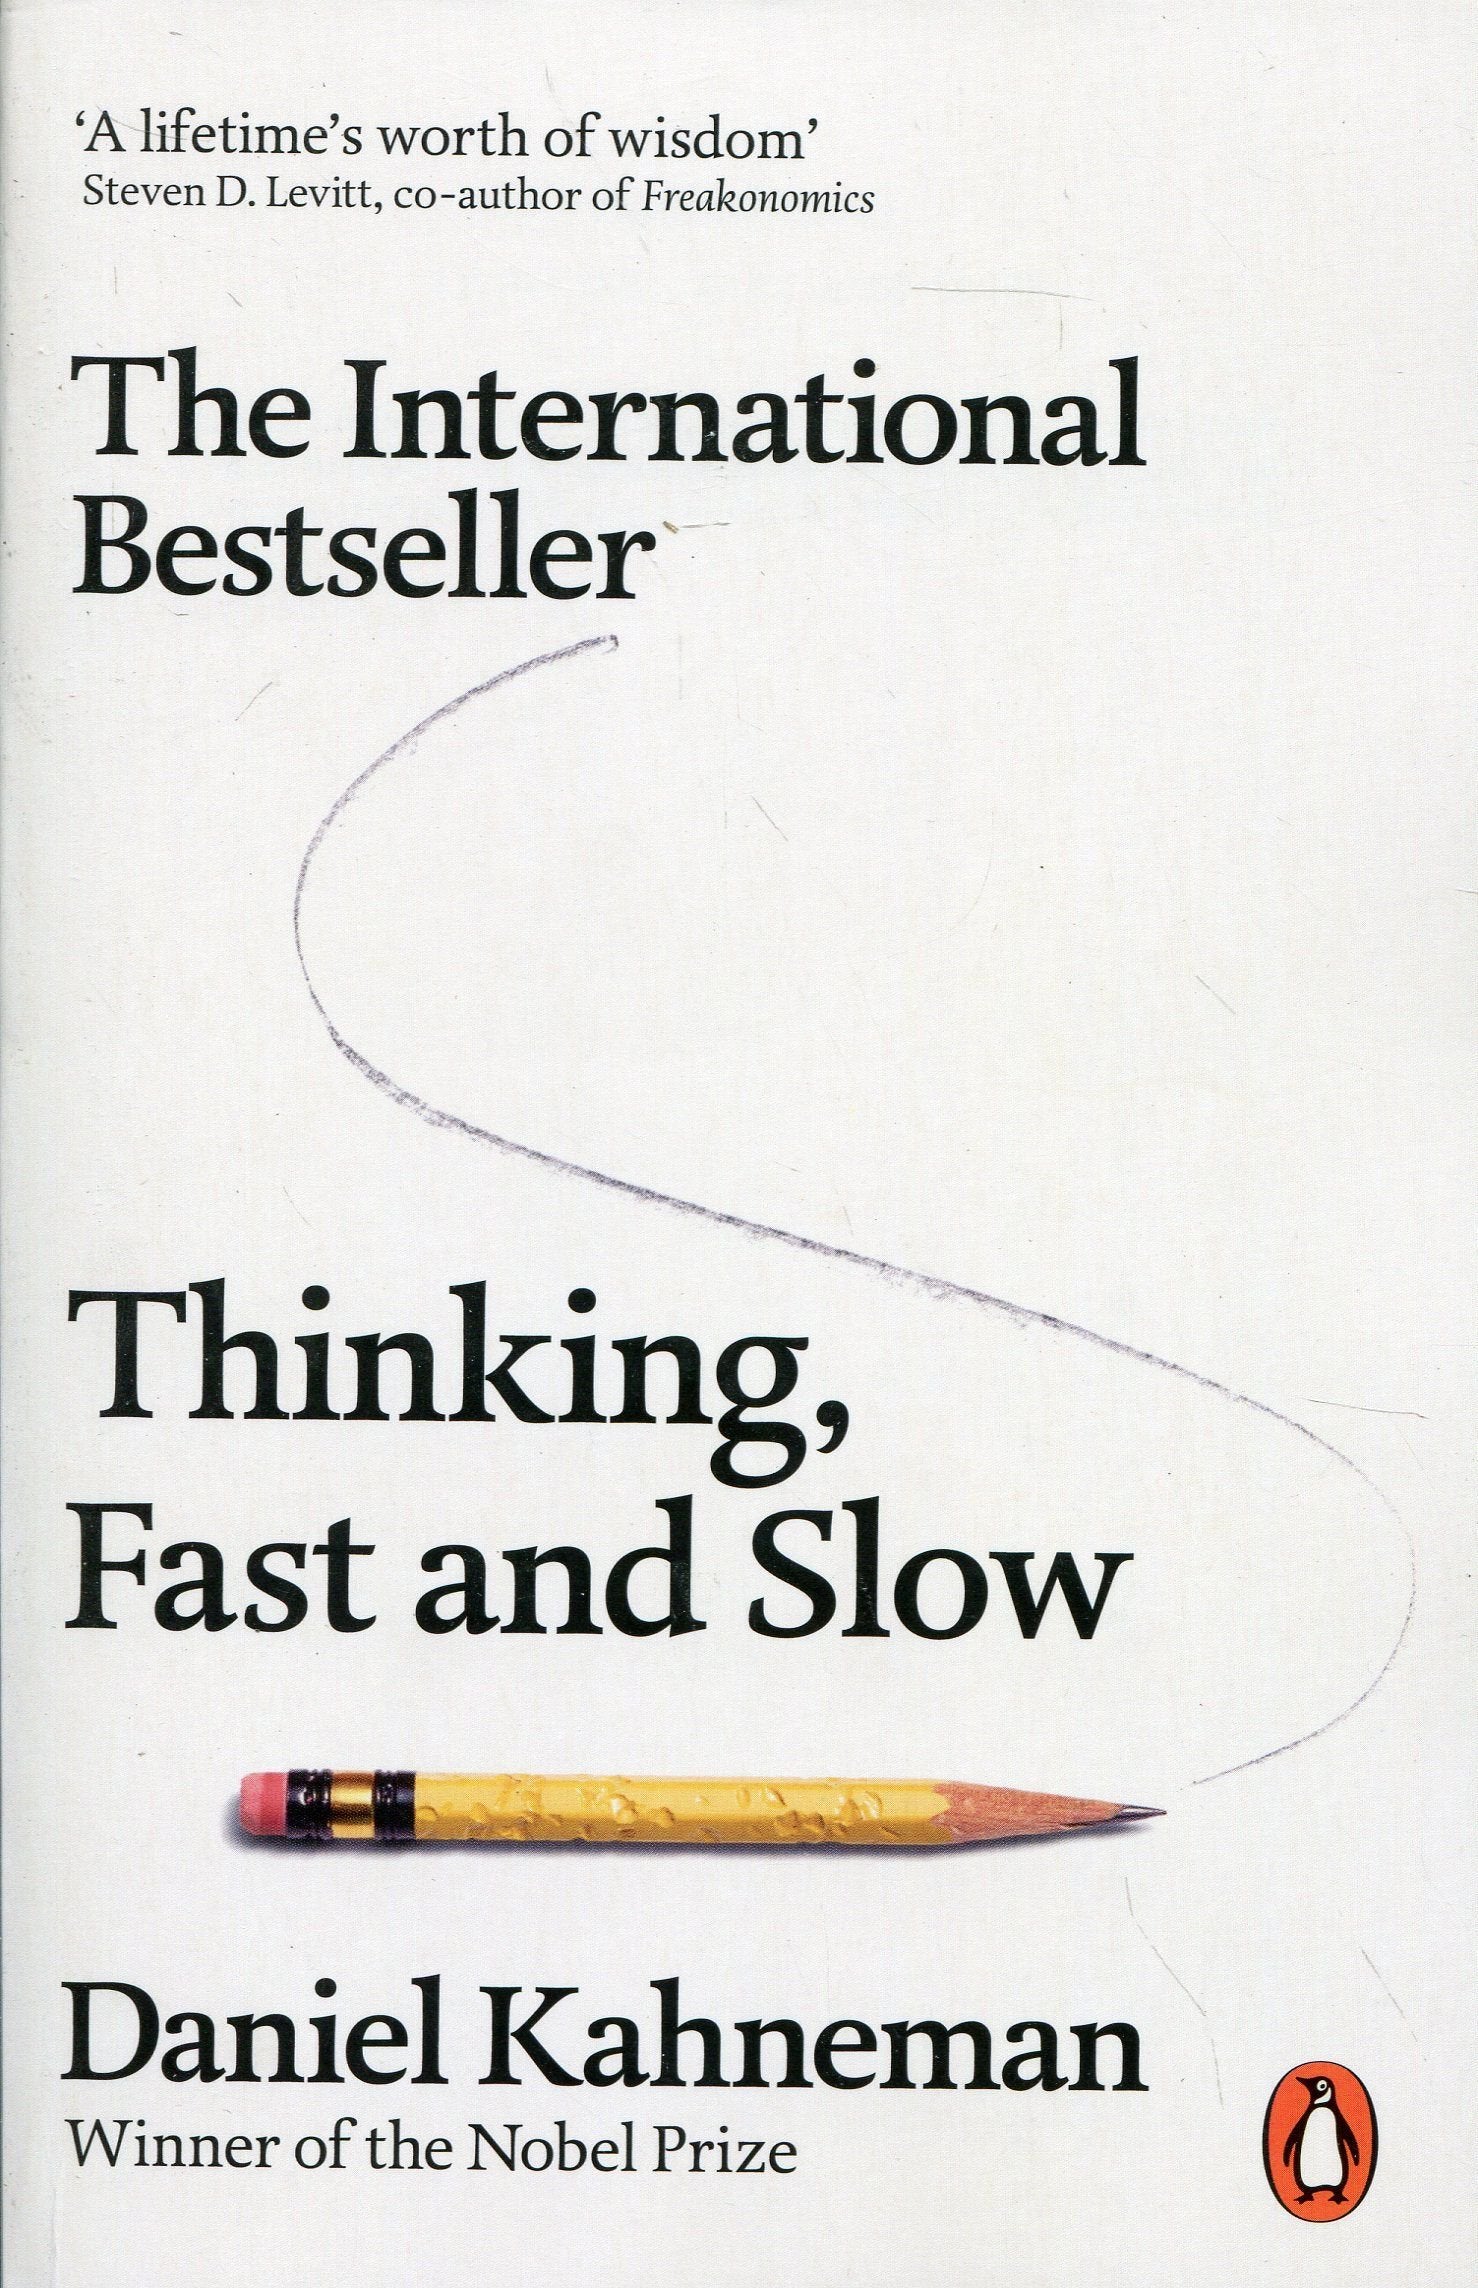 Thinking, fast and slow - a book on the reading list for students on our Psychology course at our summer school in Oxford